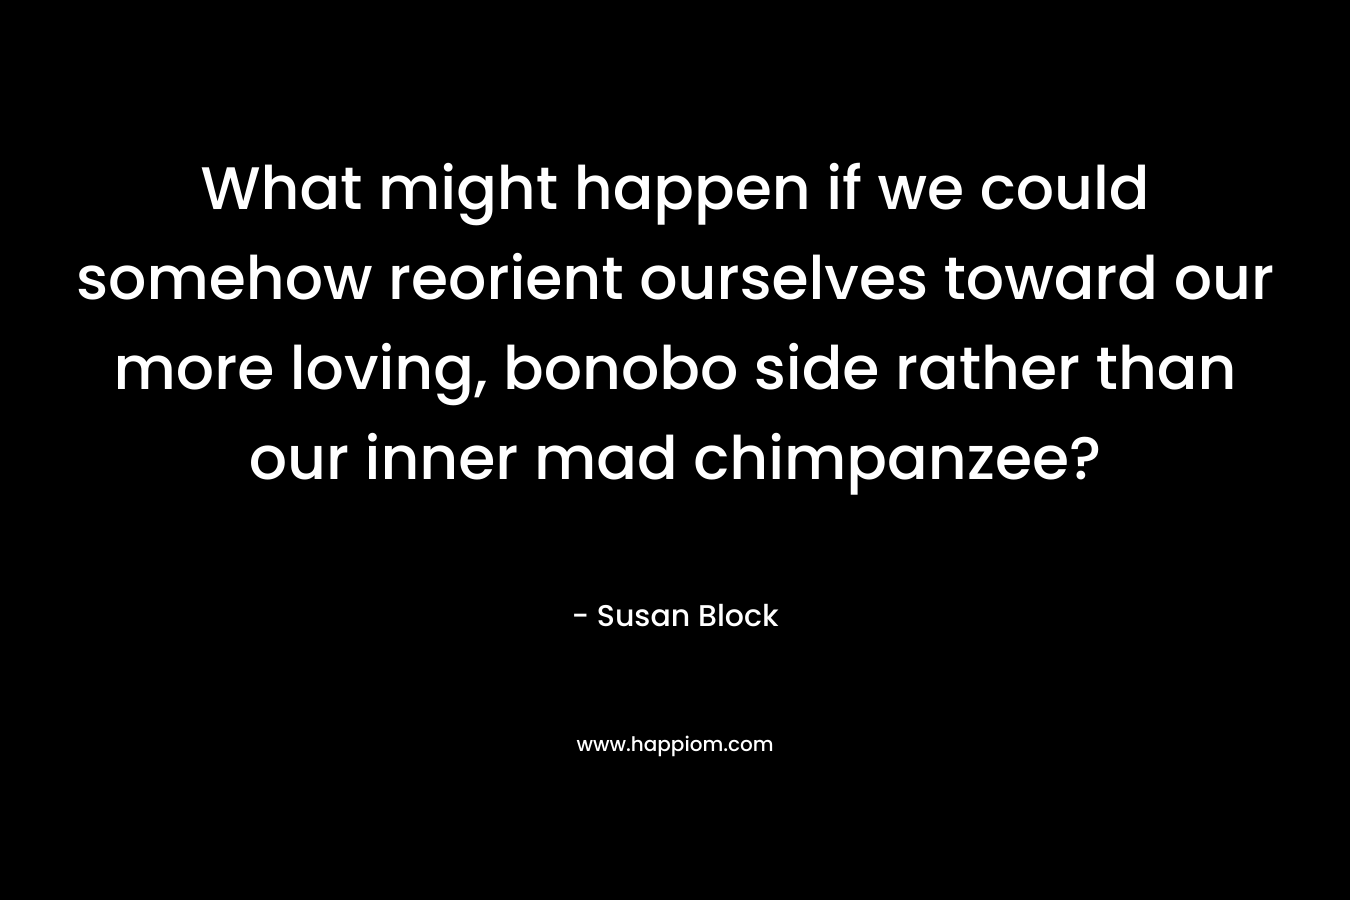 What might happen if we could somehow reorient ourselves toward our more loving, bonobo side rather than our inner mad chimpanzee? – Susan Block